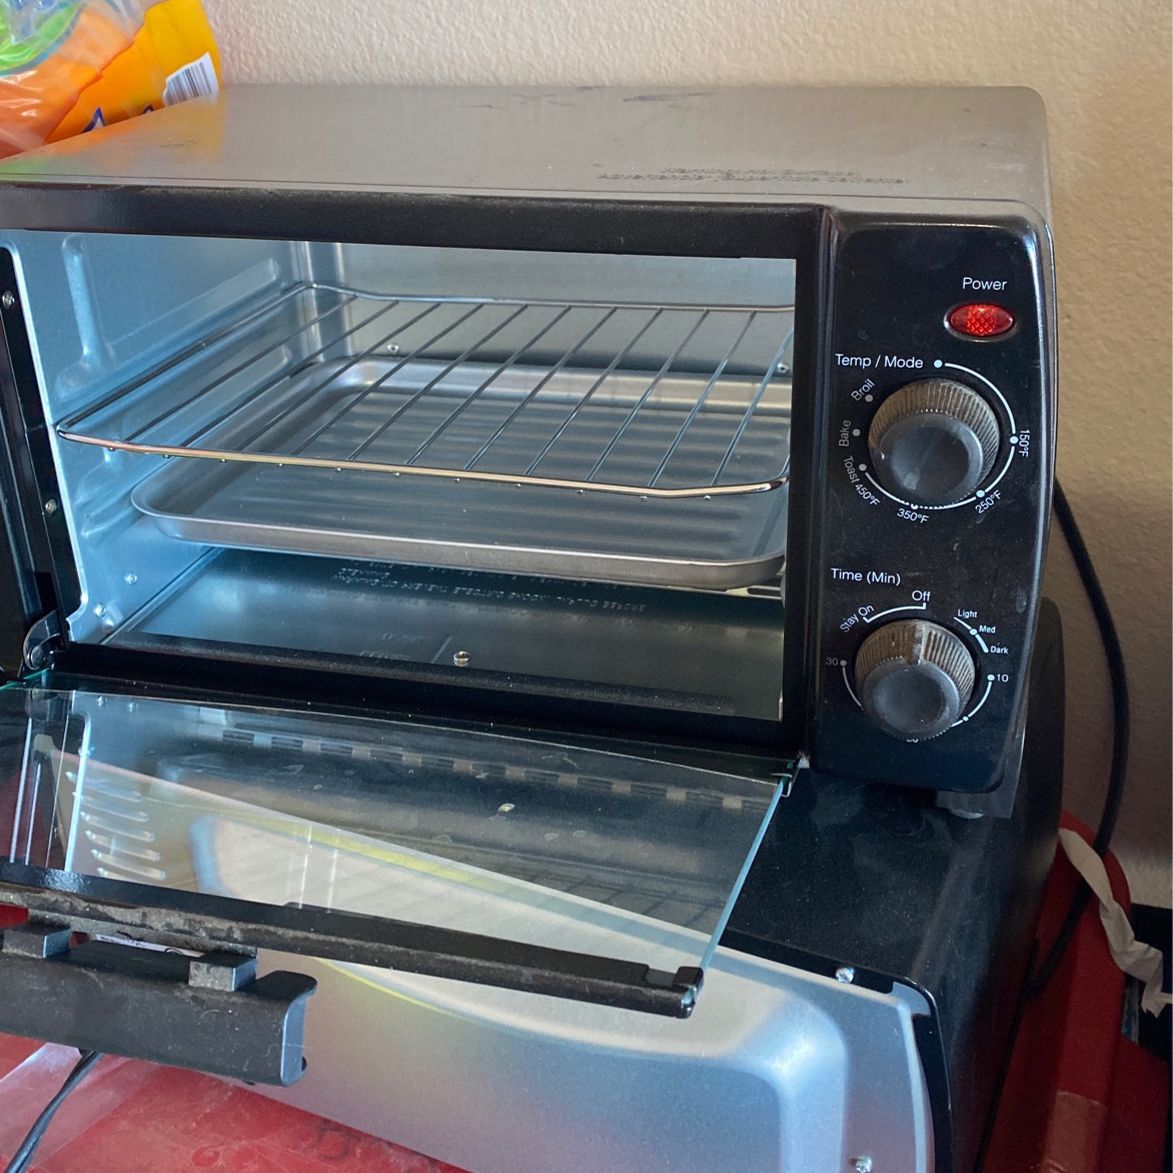 Comfee Microwave for Sale in Mesa, AZ - OfferUp